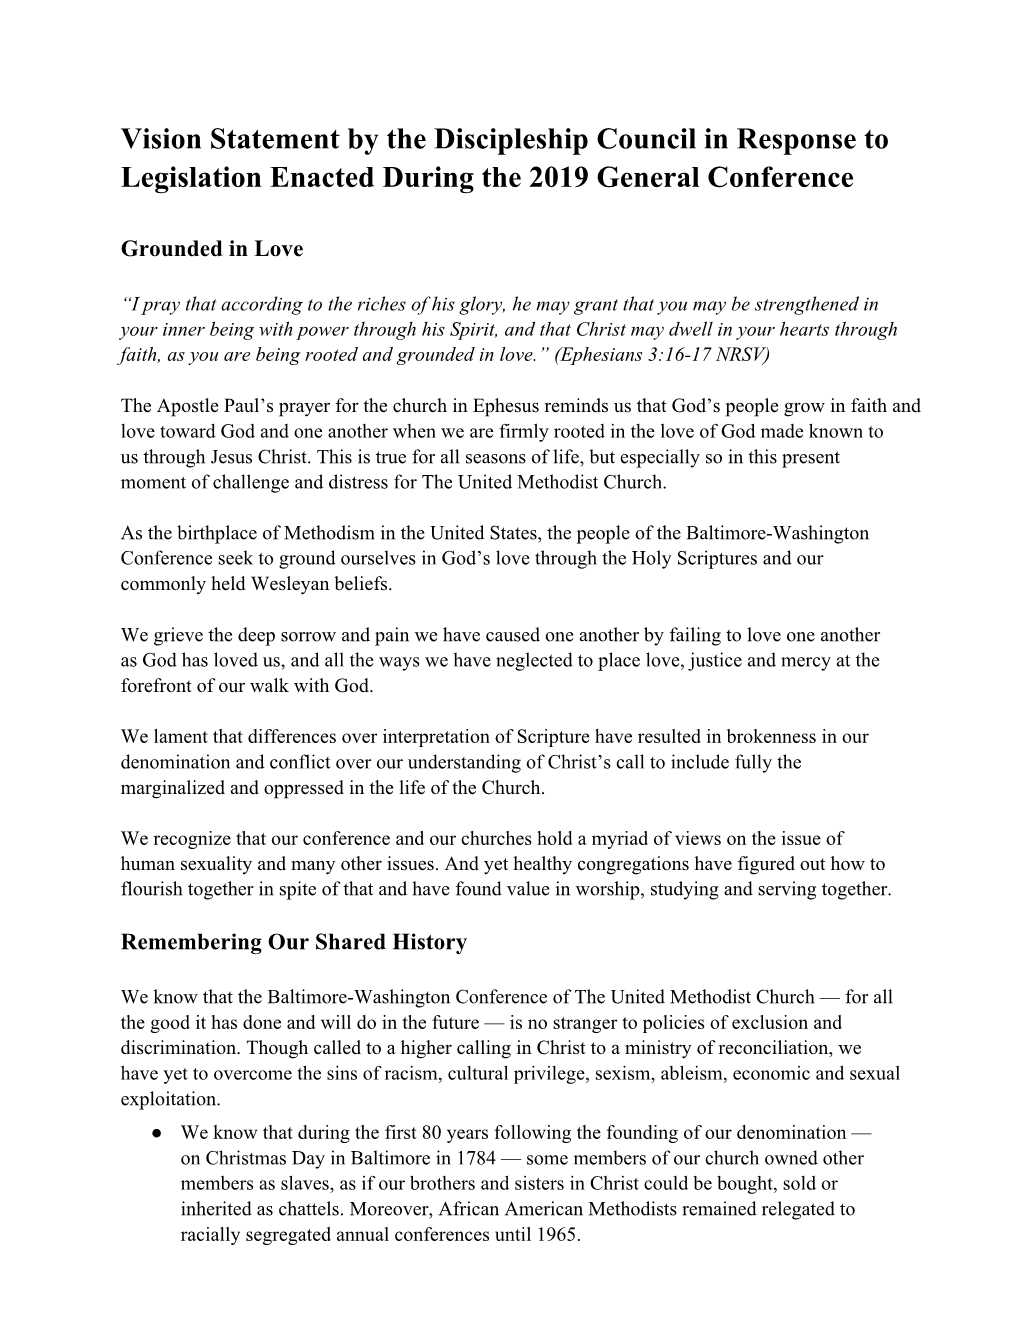 Vision Statement by the Discipleship Council in Response to Legislation Enacted During the 2019 General Conference